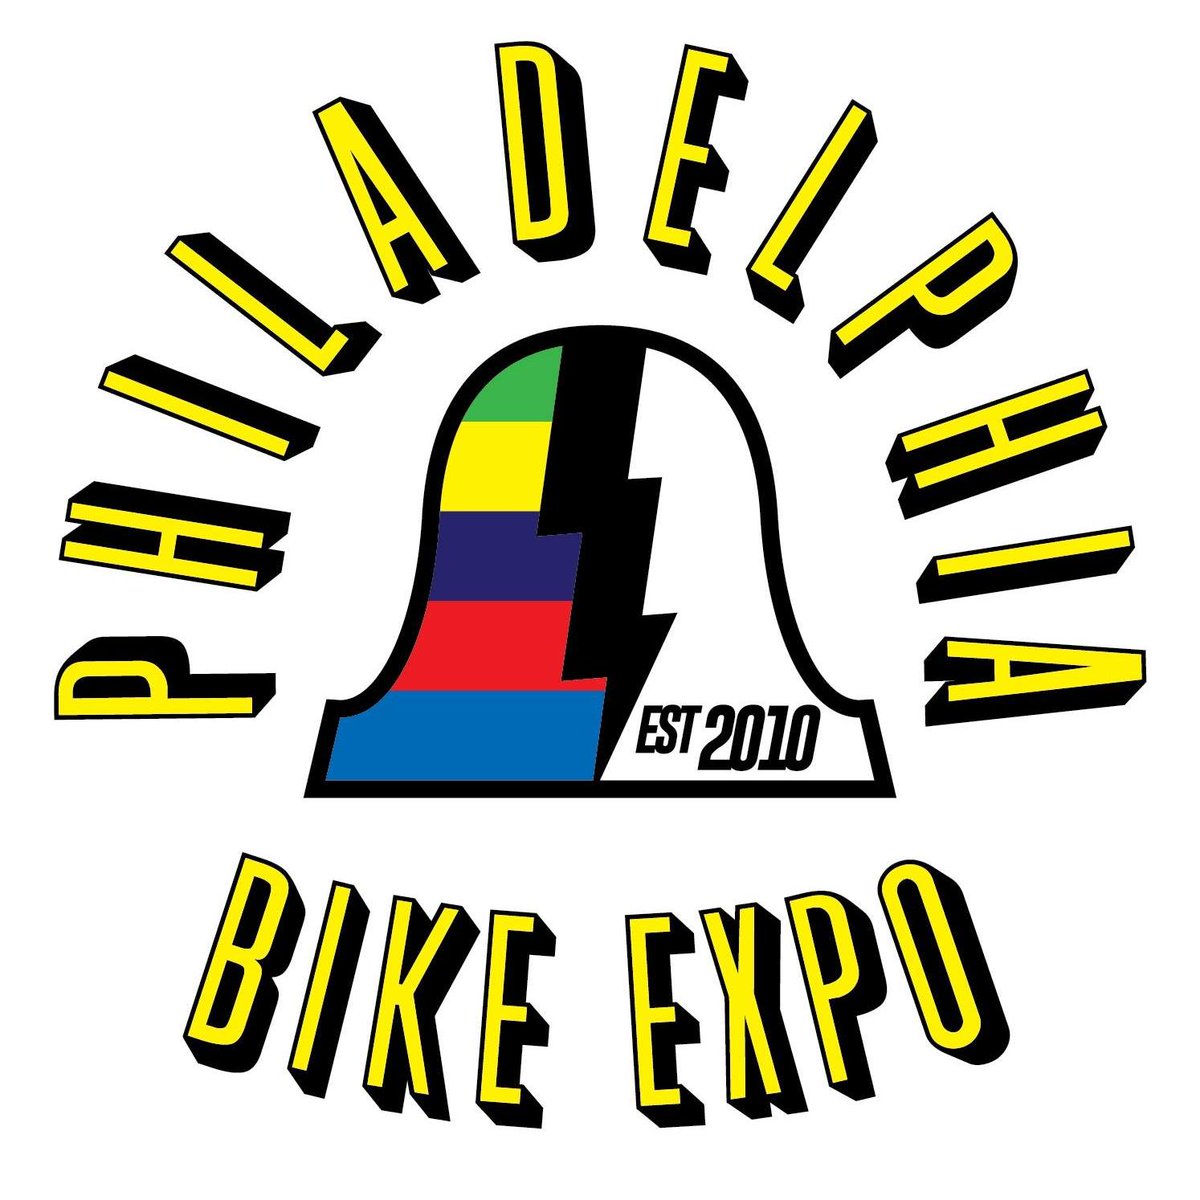 Stop by the Philly Bike Expo booth at the SWAP to learn about their event coming up in March!! @phillybikeexpo @PhillyBikeExpo